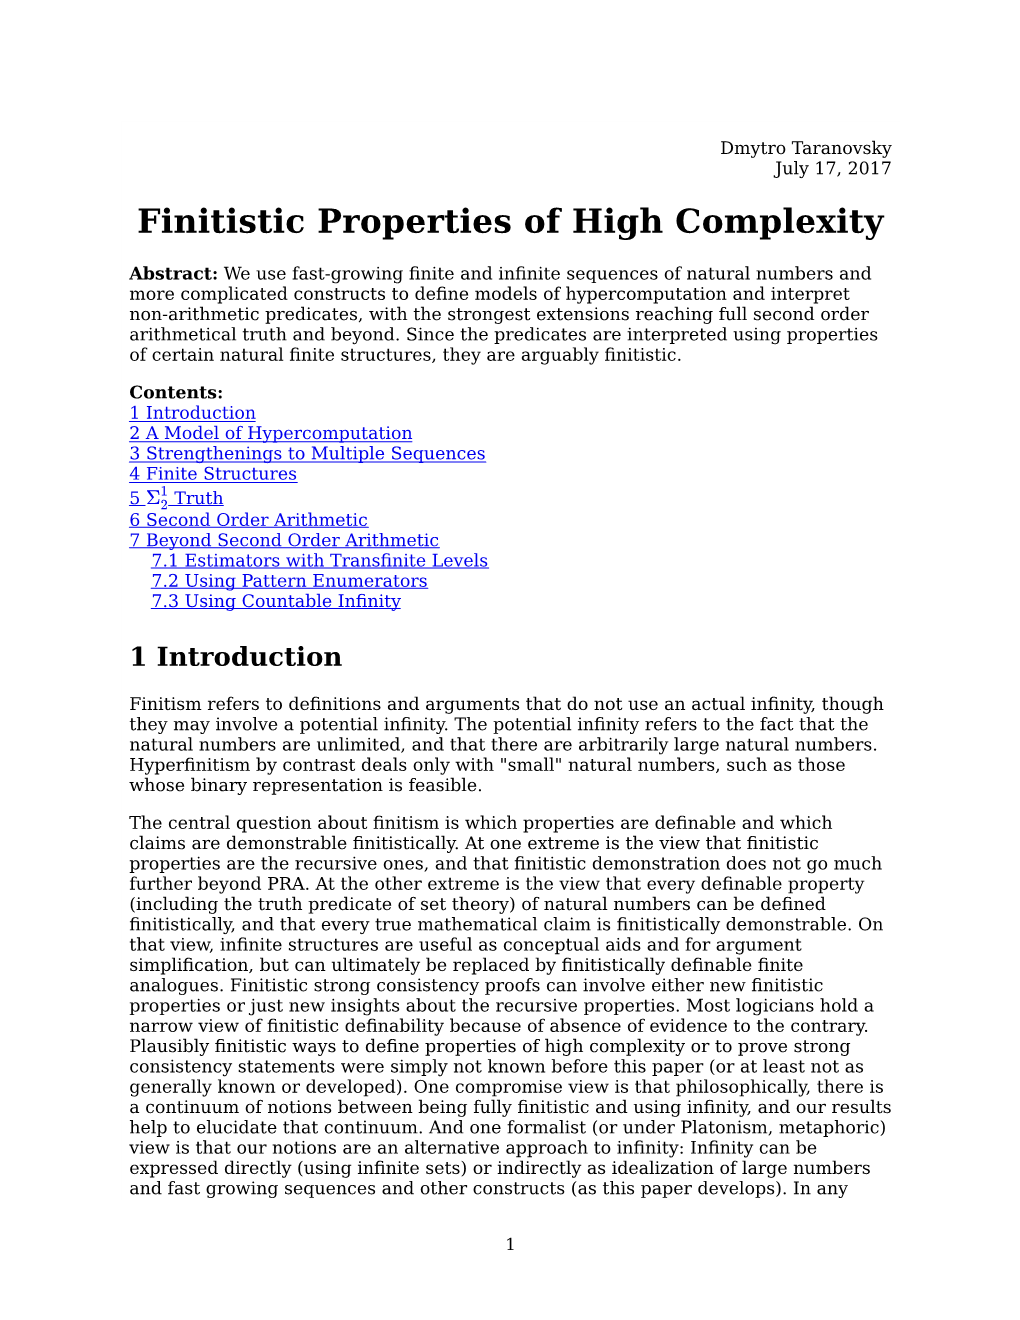 Finitistic Properties of High Complexity